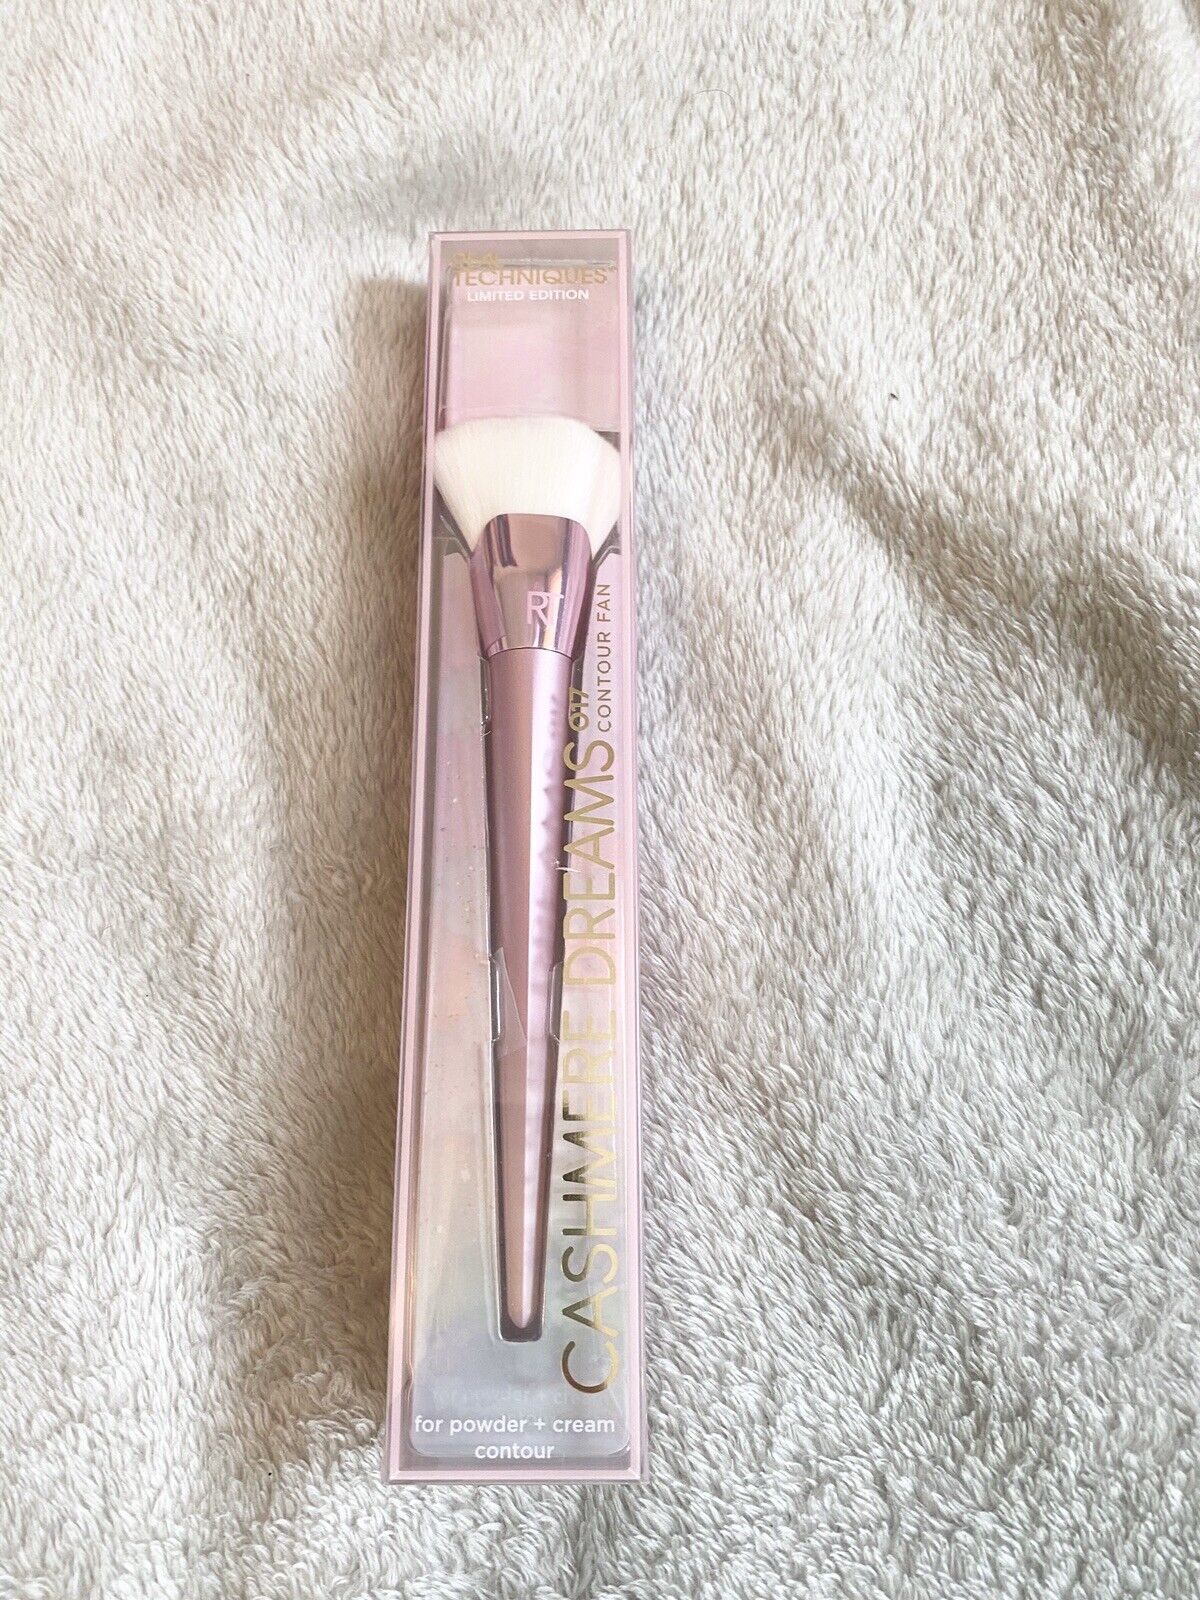 Real Techniques Cashmere Dreams Limited Edition 017 Contour Fan Brush New In Box